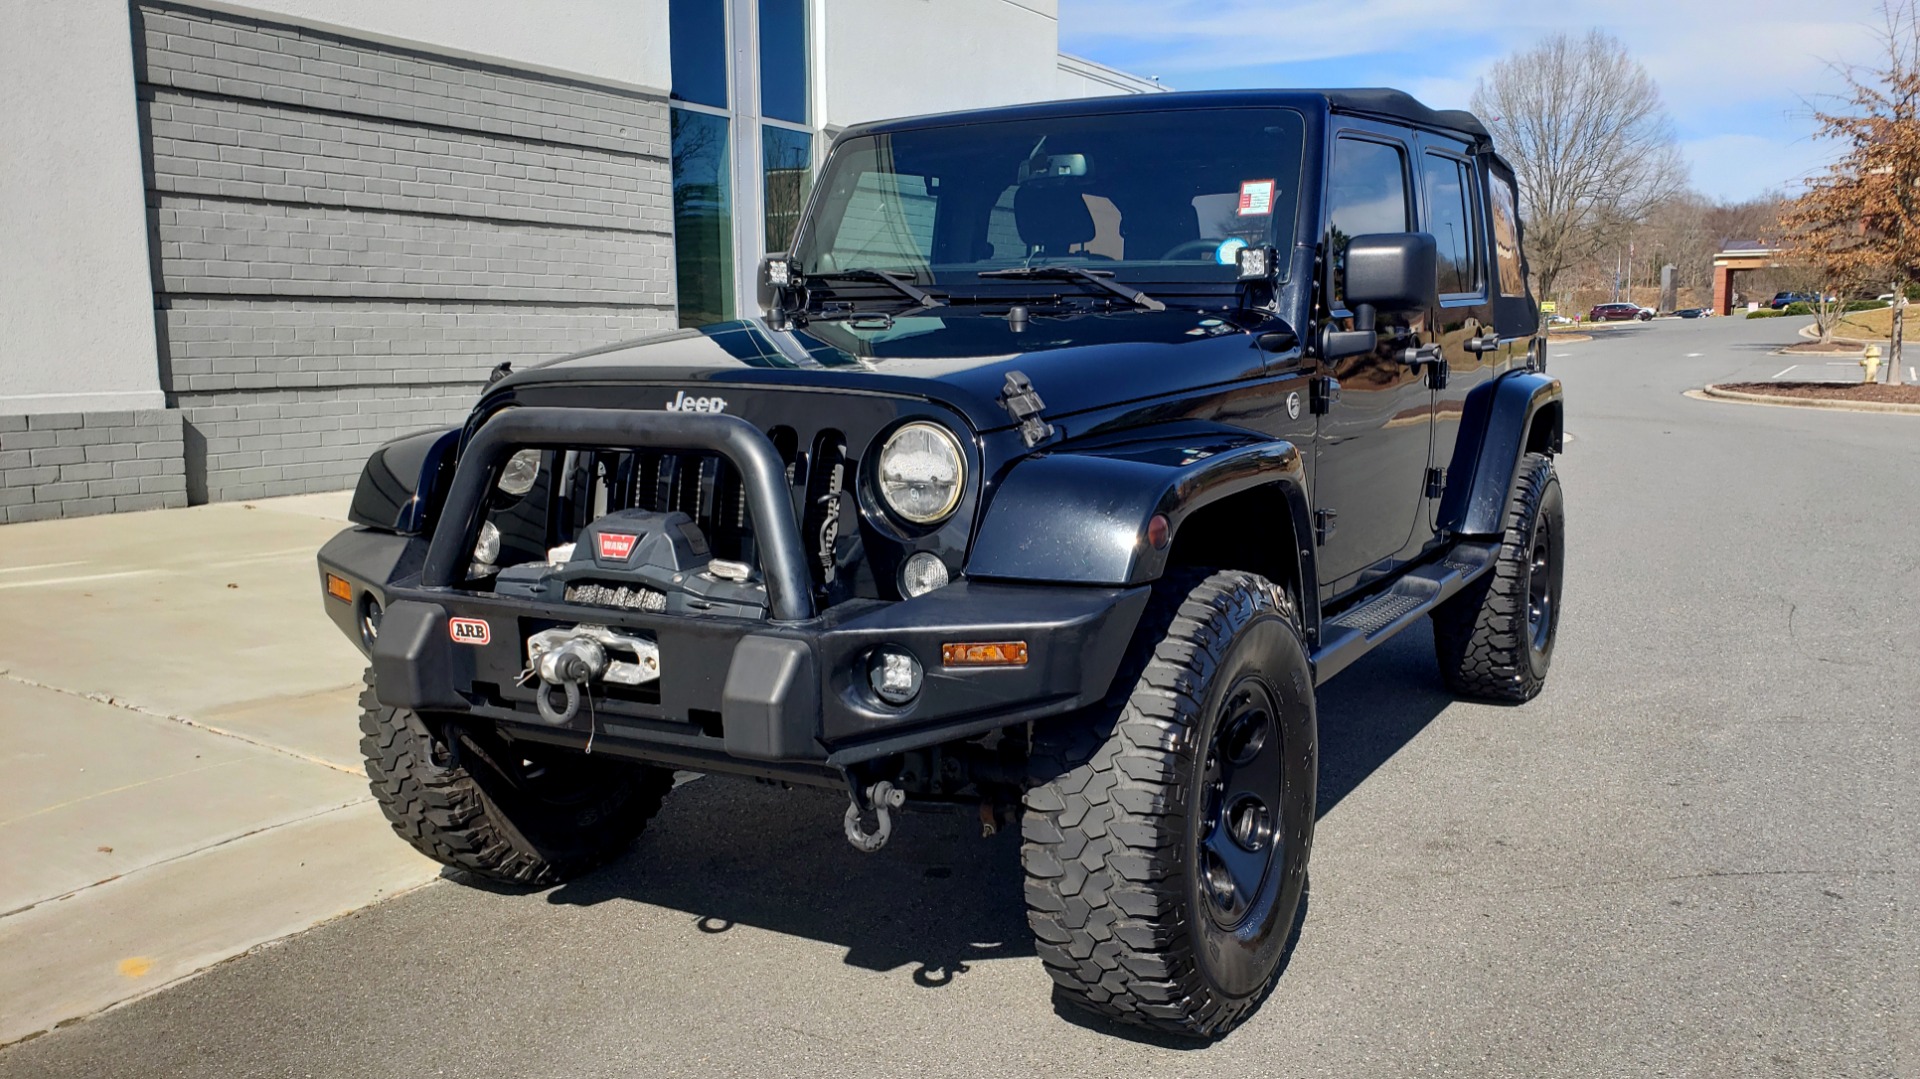 Used 2014 Jeep WRANGLER UNLIMITED SAHARA 4X4 / 3.6L V6 / 5-SPD AUTO / NAV / TOW PKG / SOFT-TOP for sale Sold at Formula Imports in Charlotte NC 28227 1